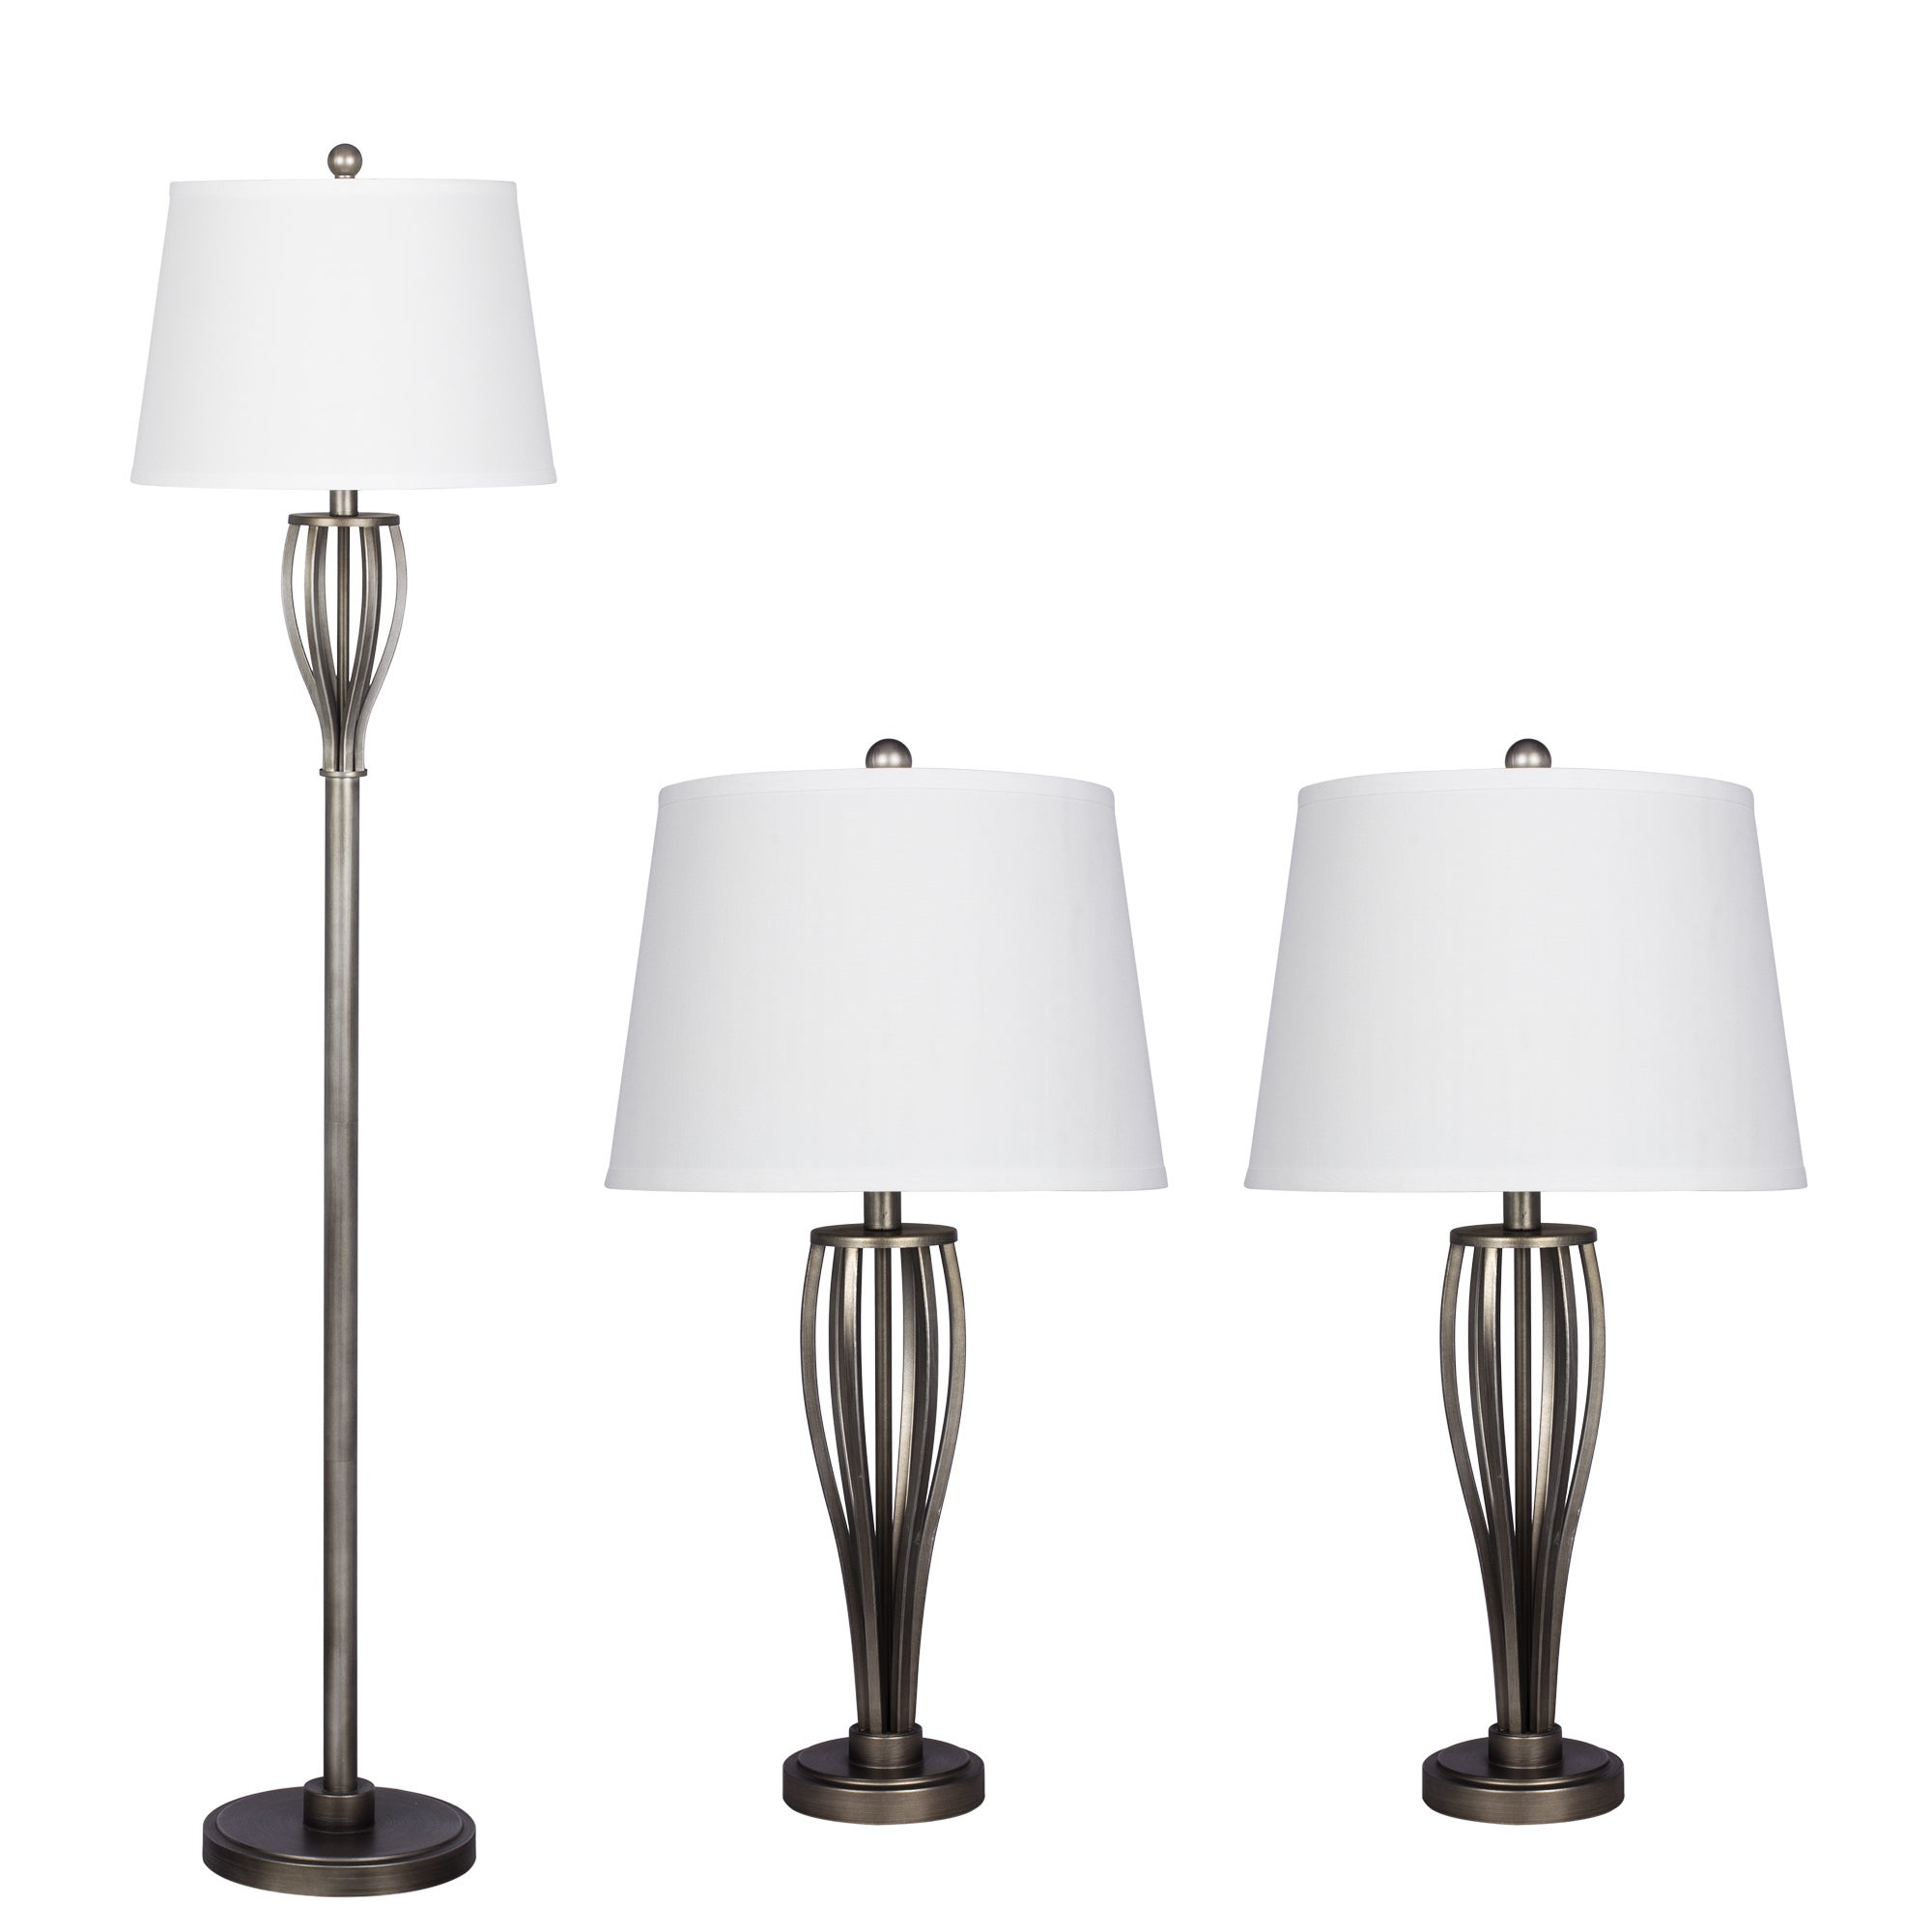 Antique Pewter 3 Piece Contour Metal Lamp Set Includes 2 Table Lamps 1 Floor Lamp within size 2000 X 2000